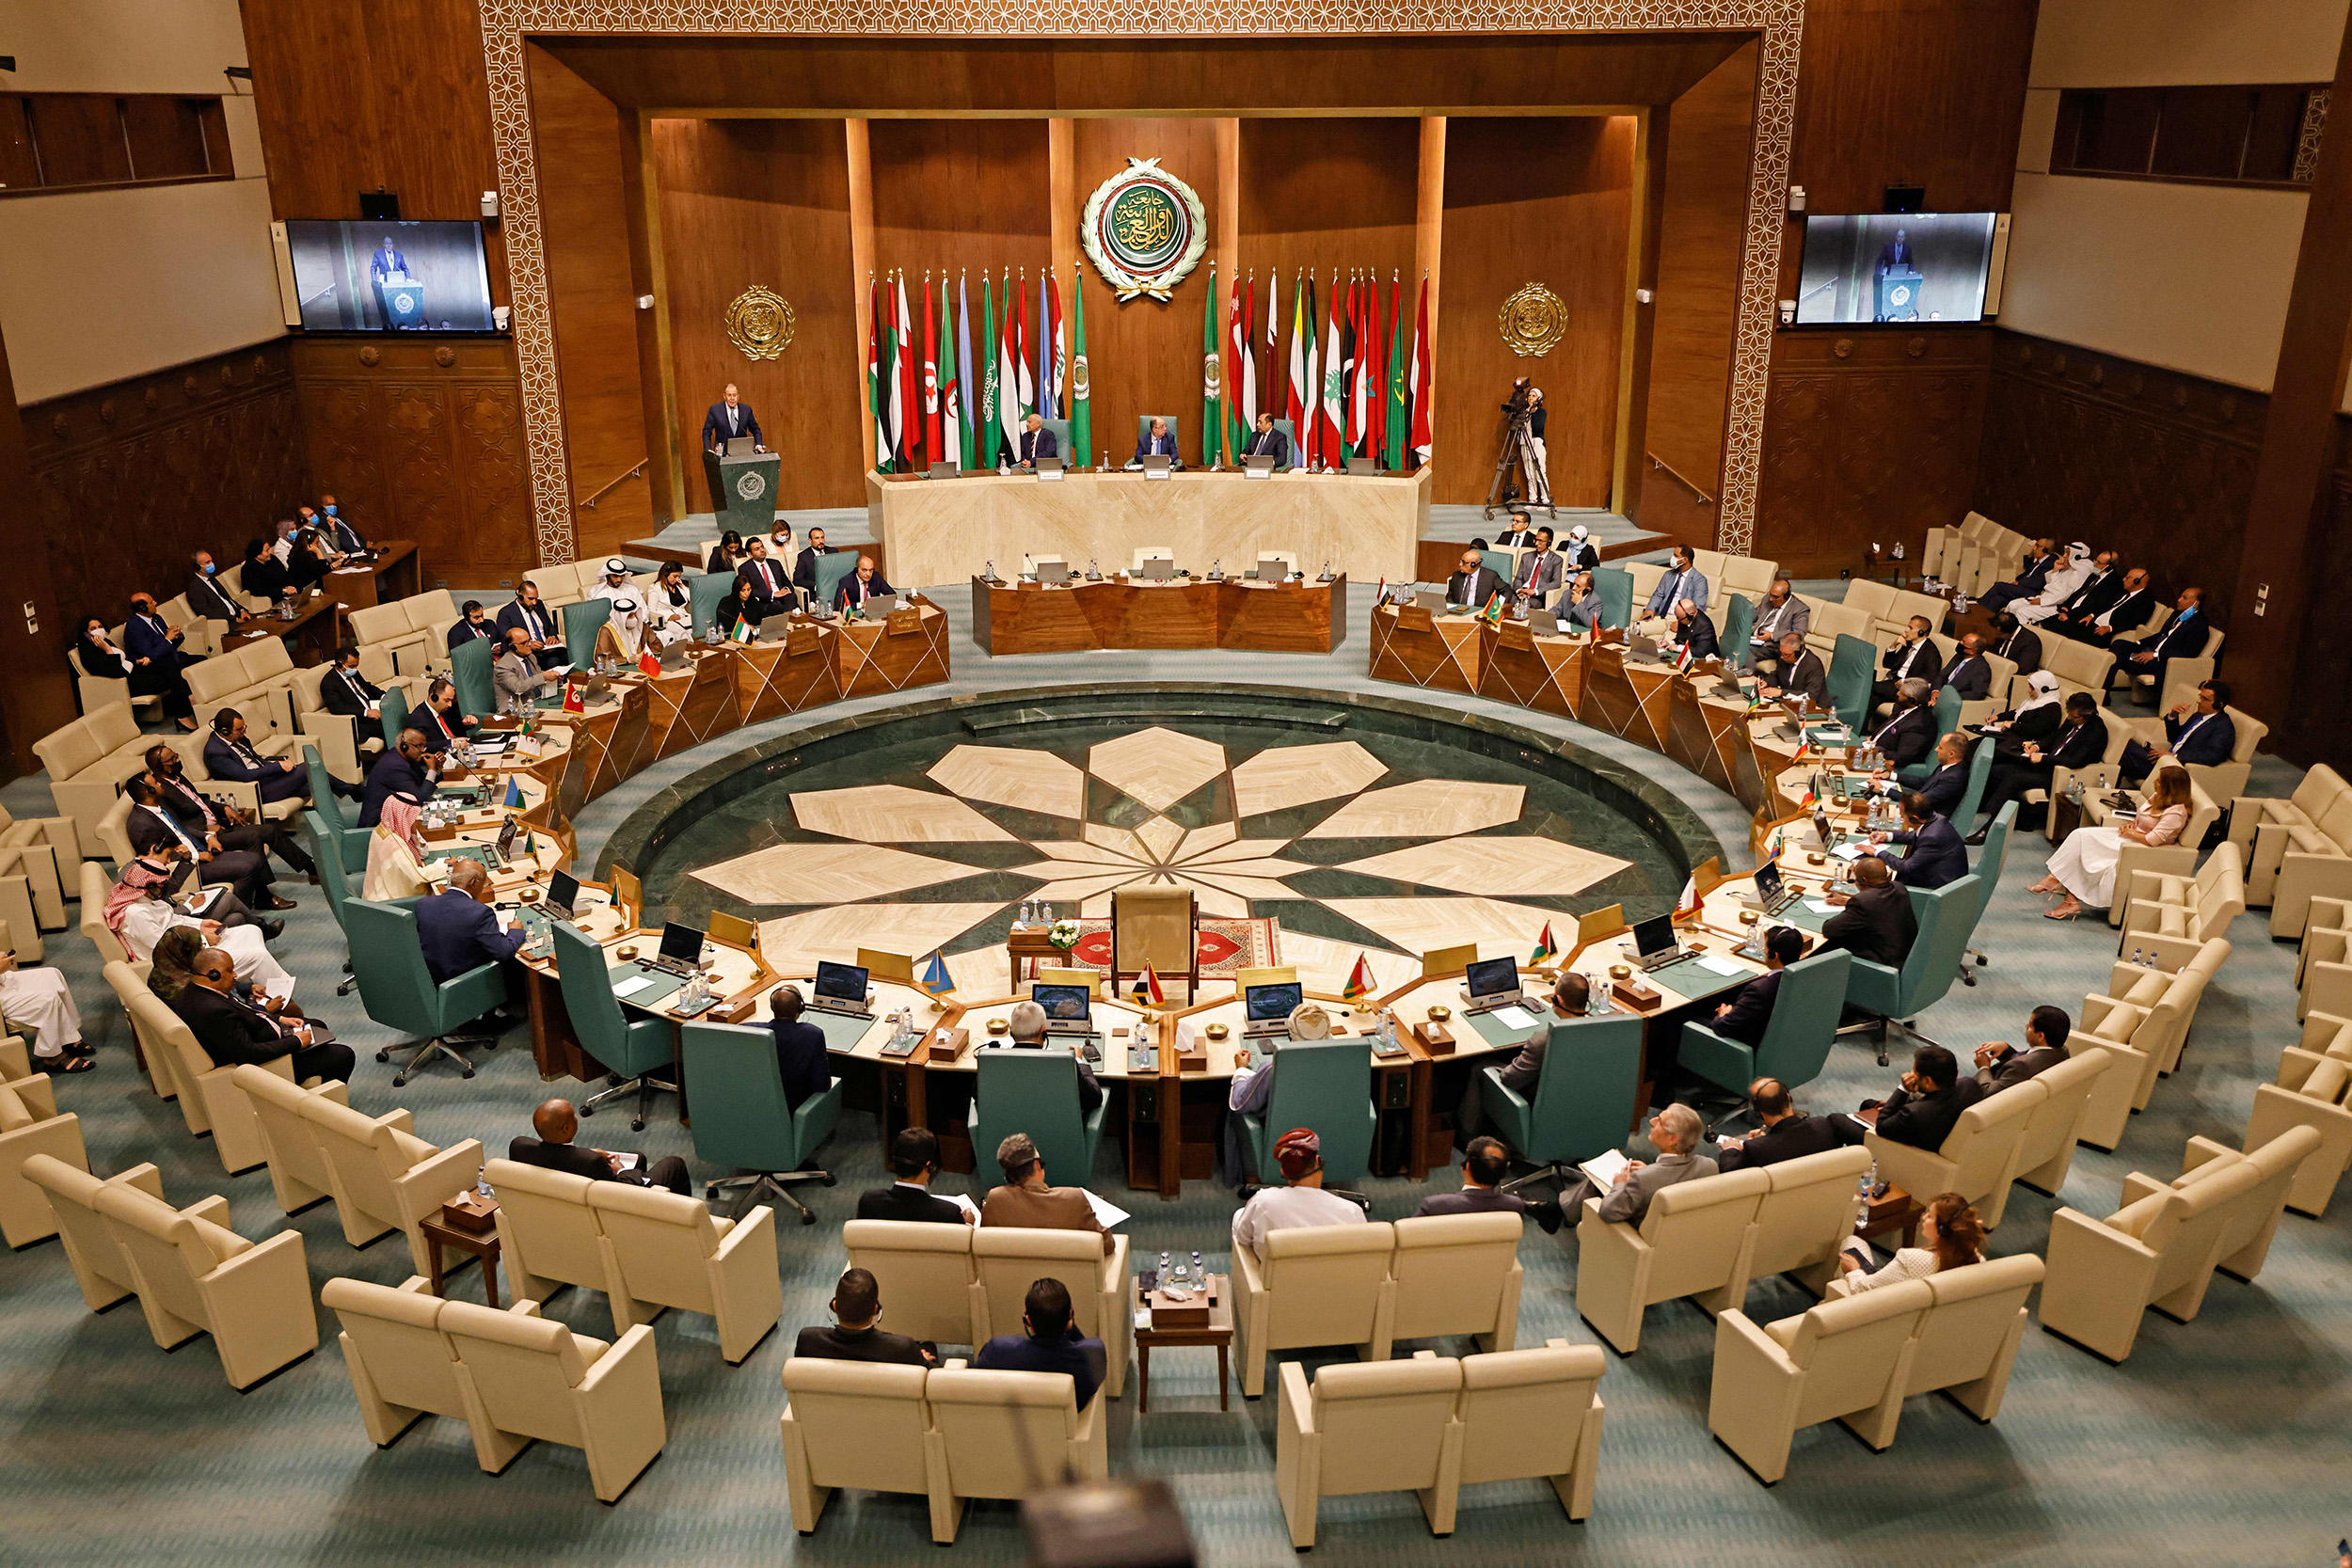 Russian Foreign Minister Sergei Lavrov addresses the Arab League meeting at its headquarters in Cairo on July 24.